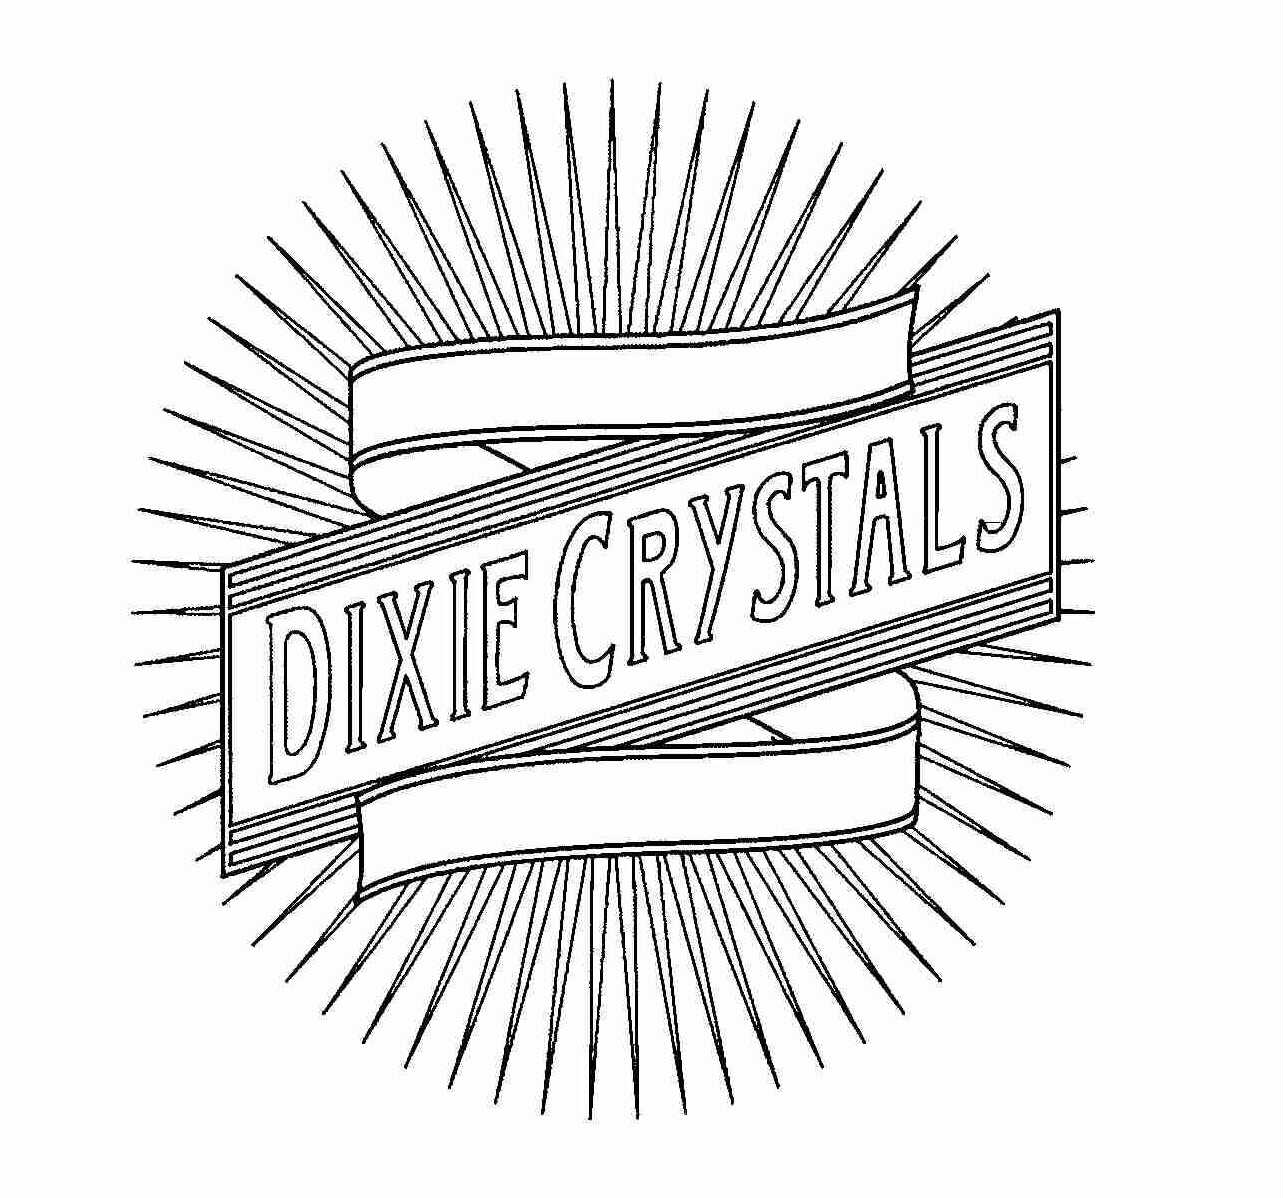 DIXIE CRYSTALS